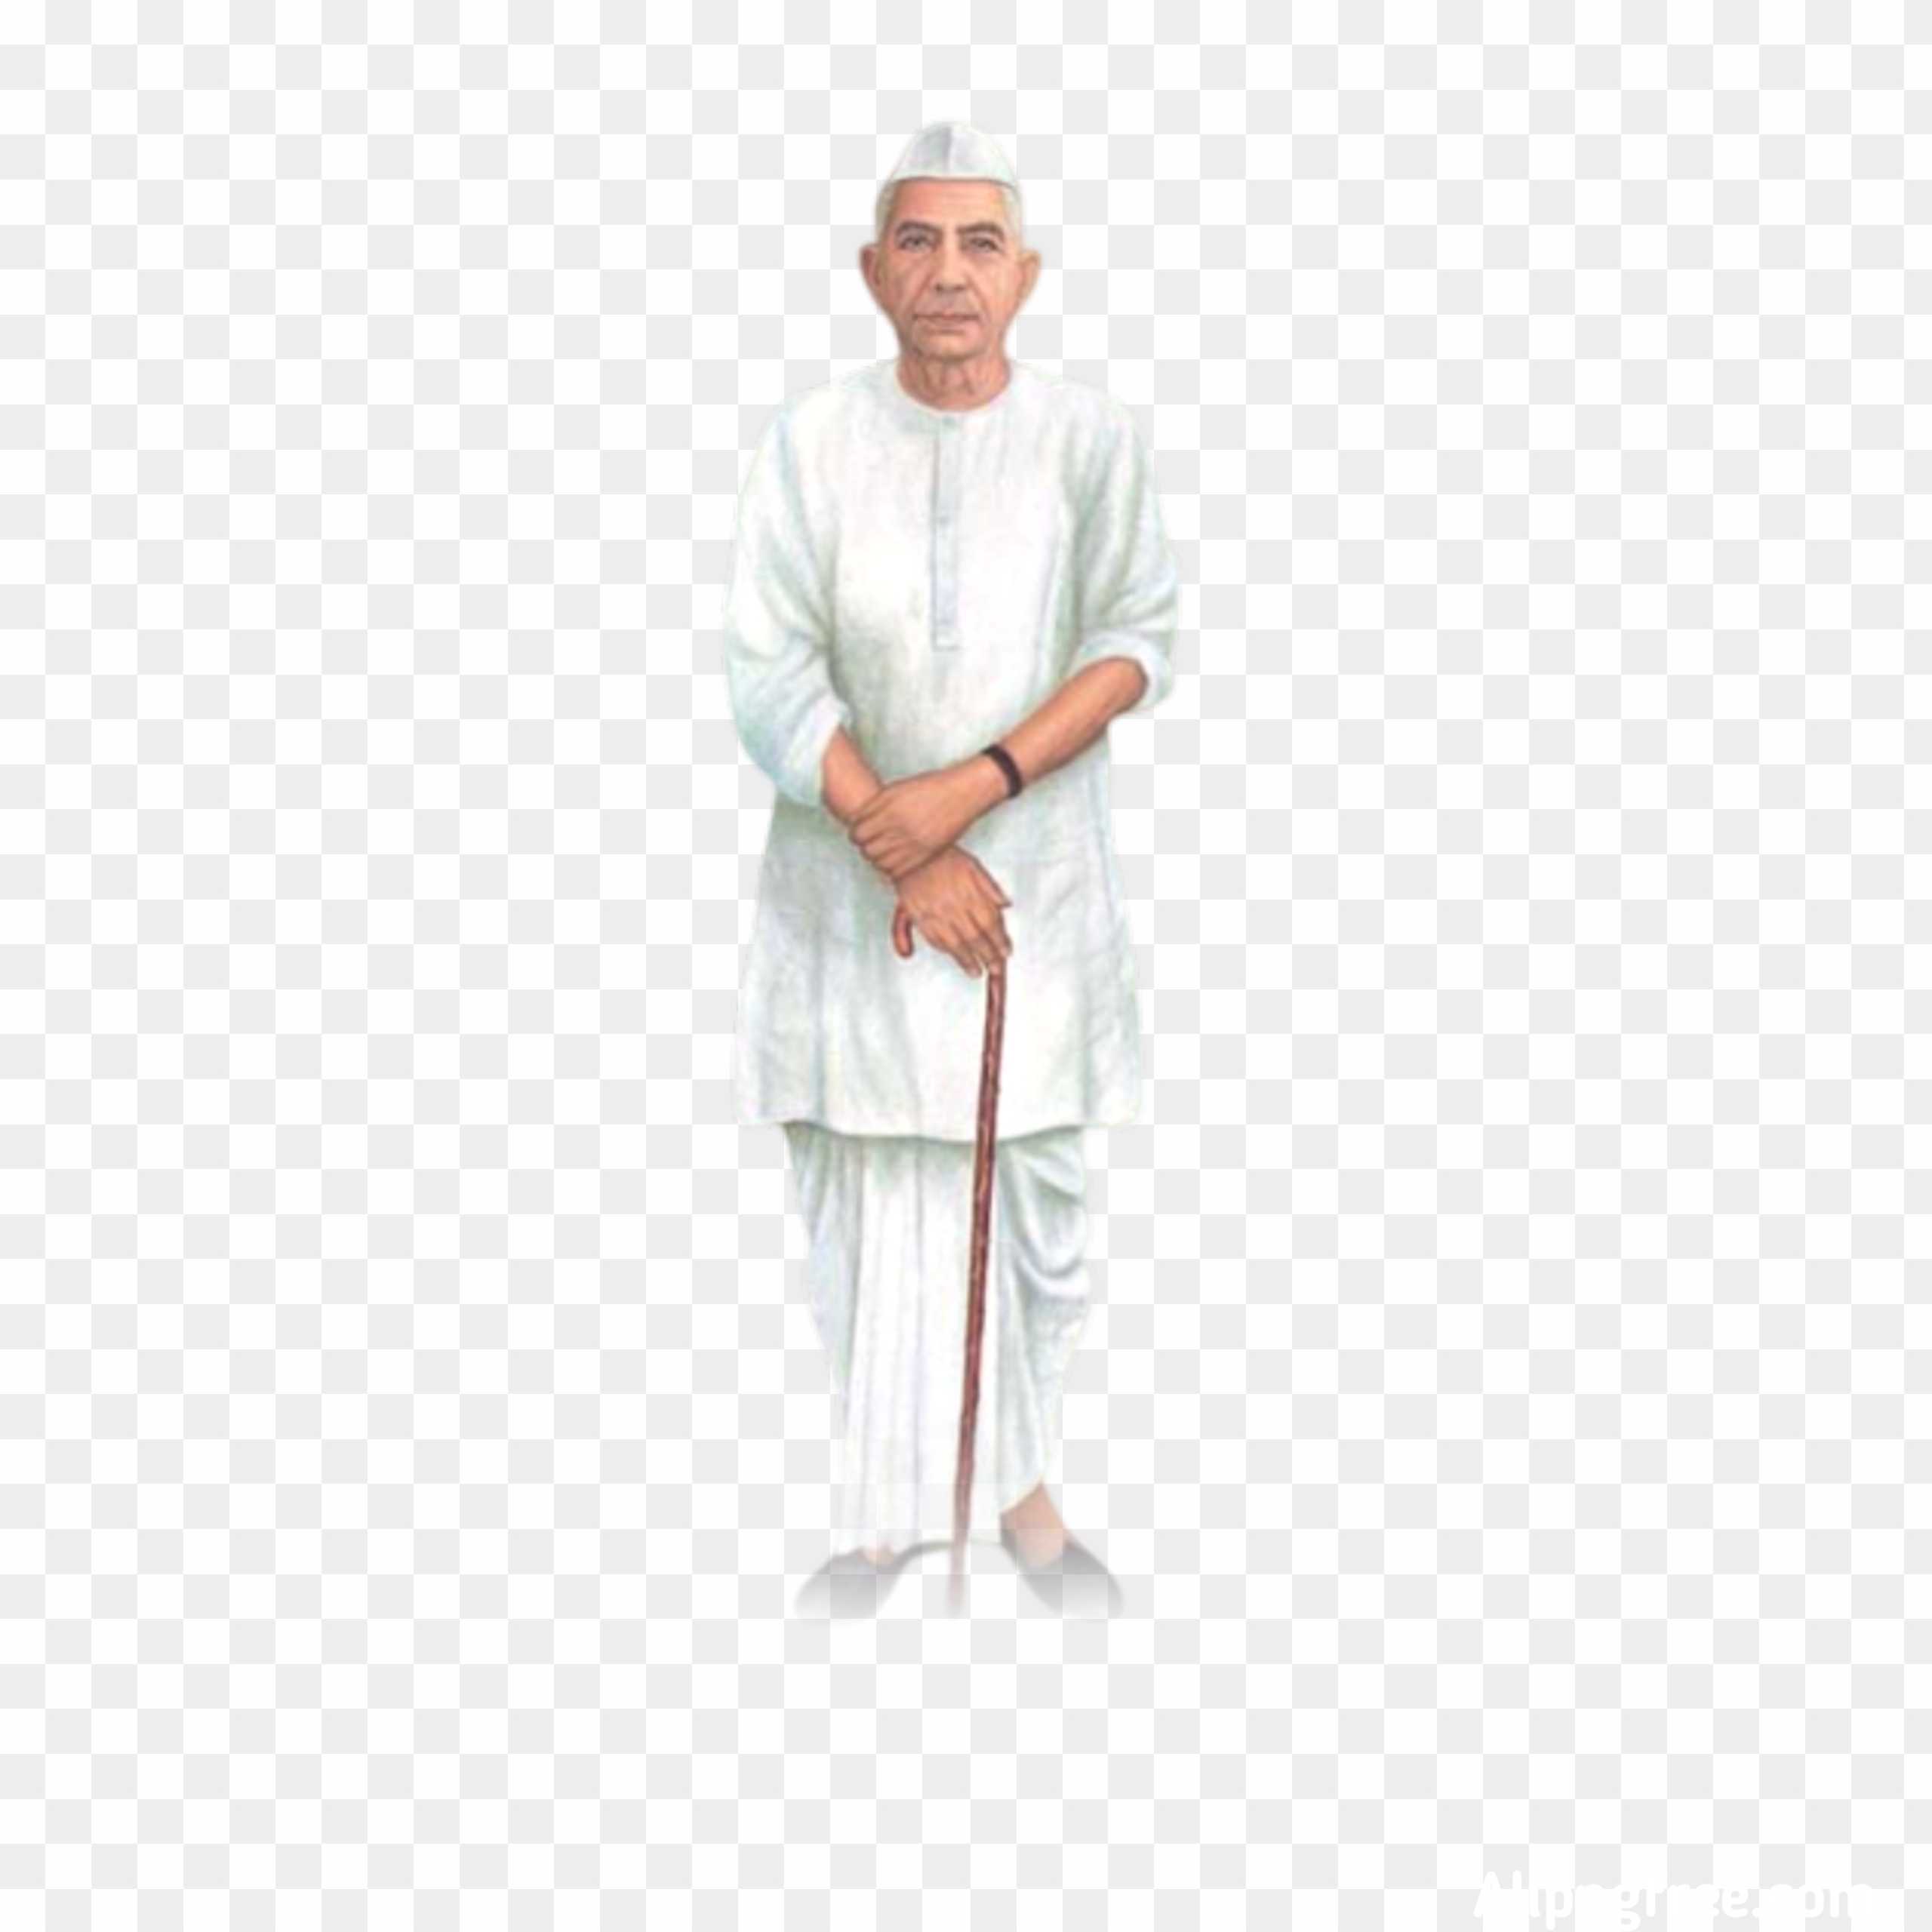 Chaudhary Charan Singh full hd png transparent images 